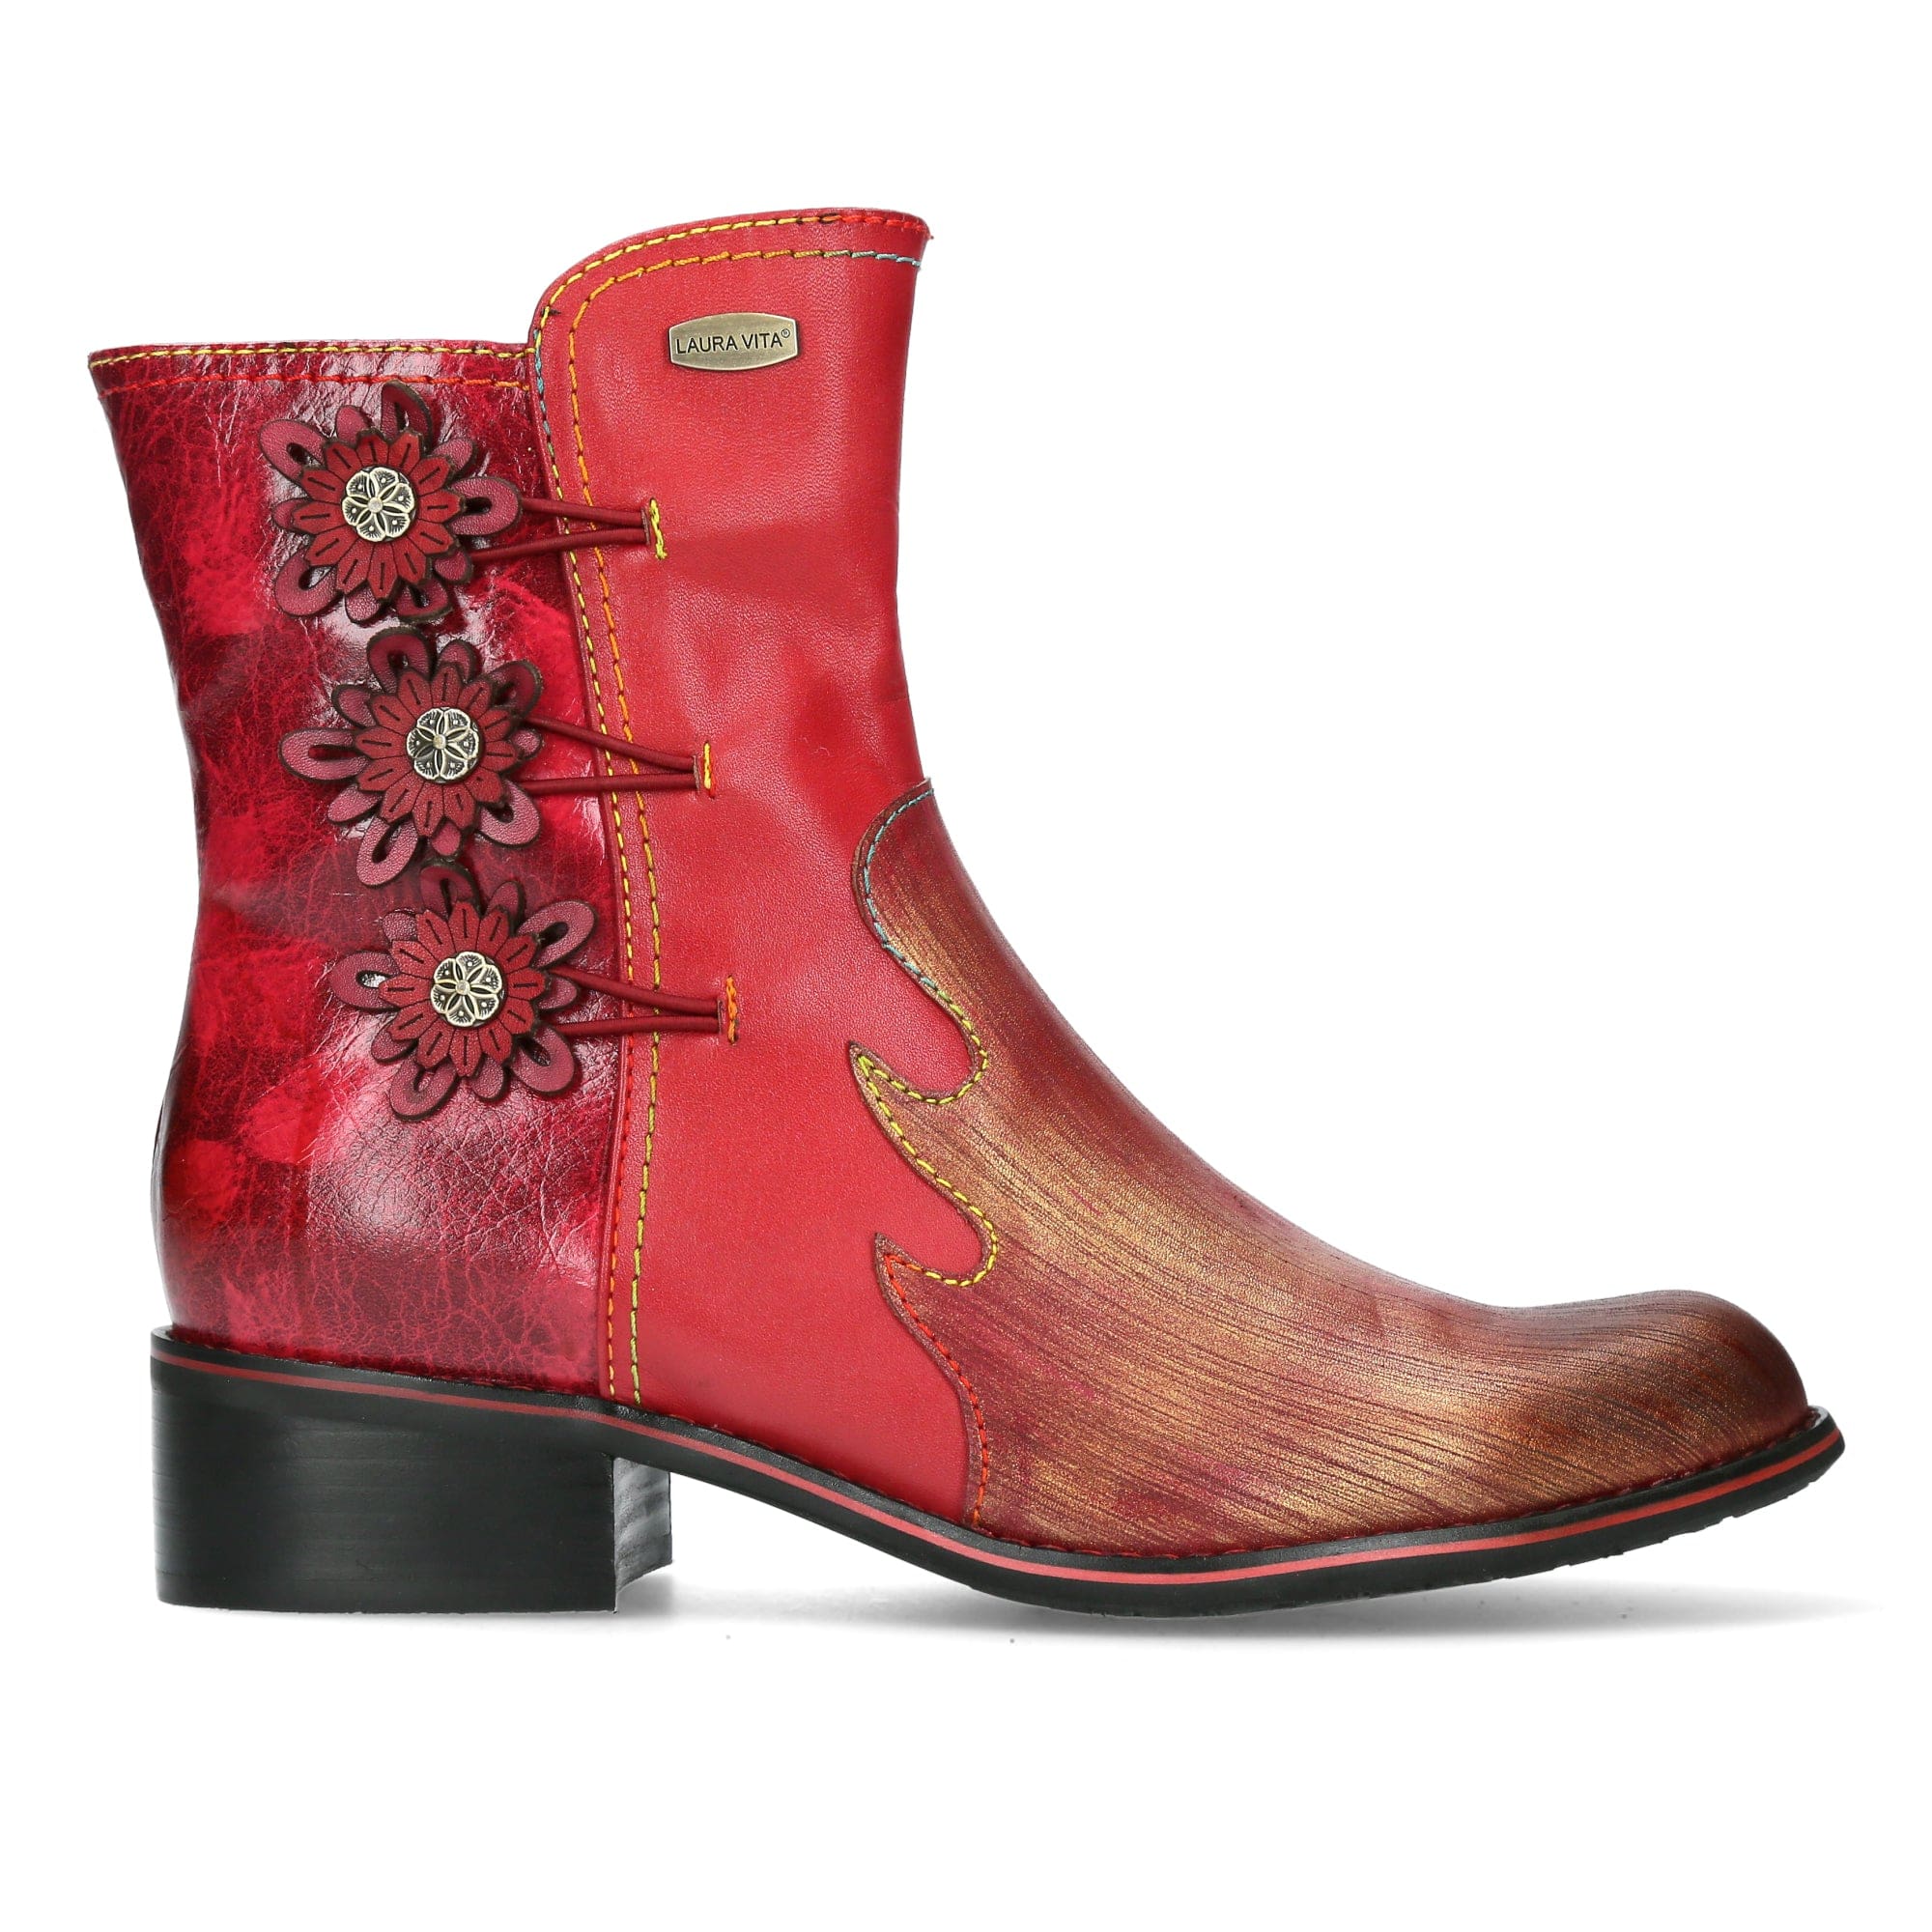 Chaussure ALICE 21 - 35 / Rouge - Boots